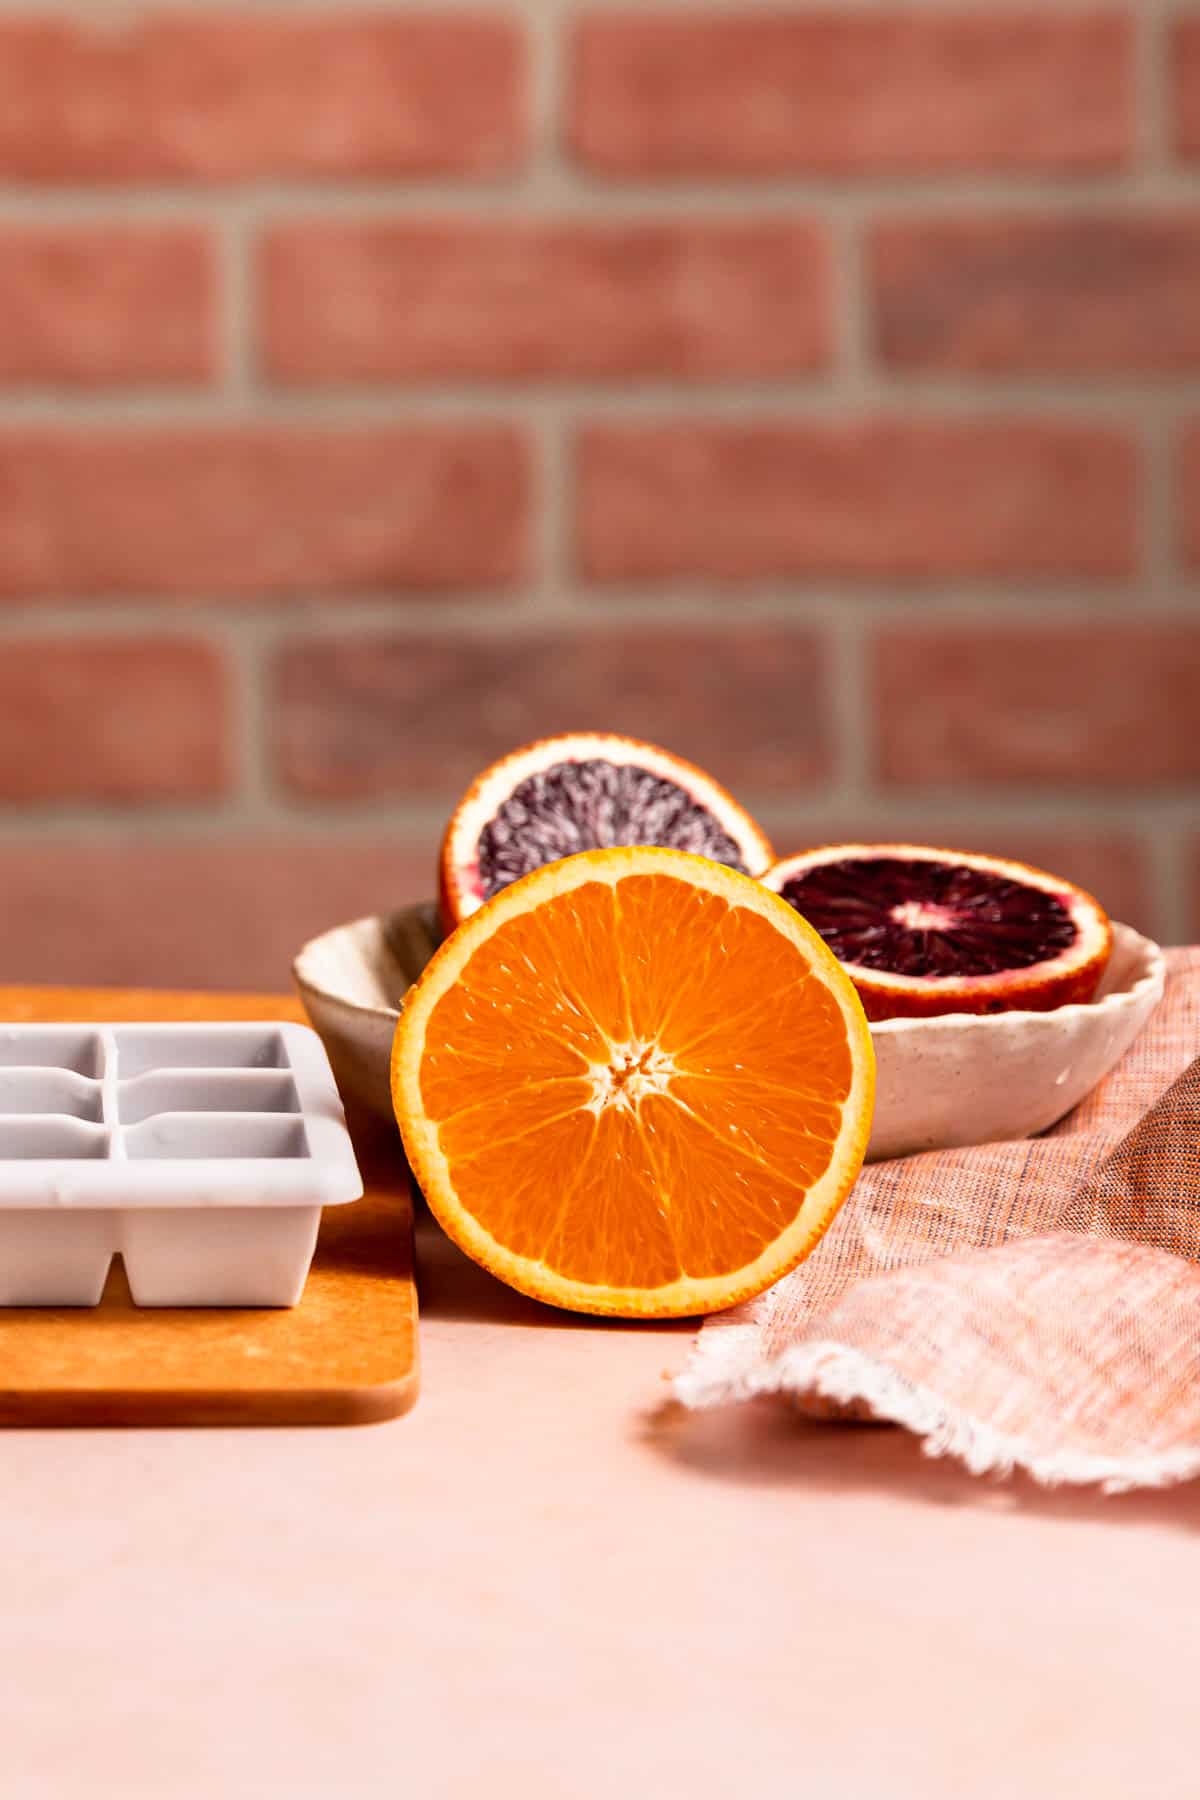 Sliced oranges and blood oranges next to an ice cube tray.